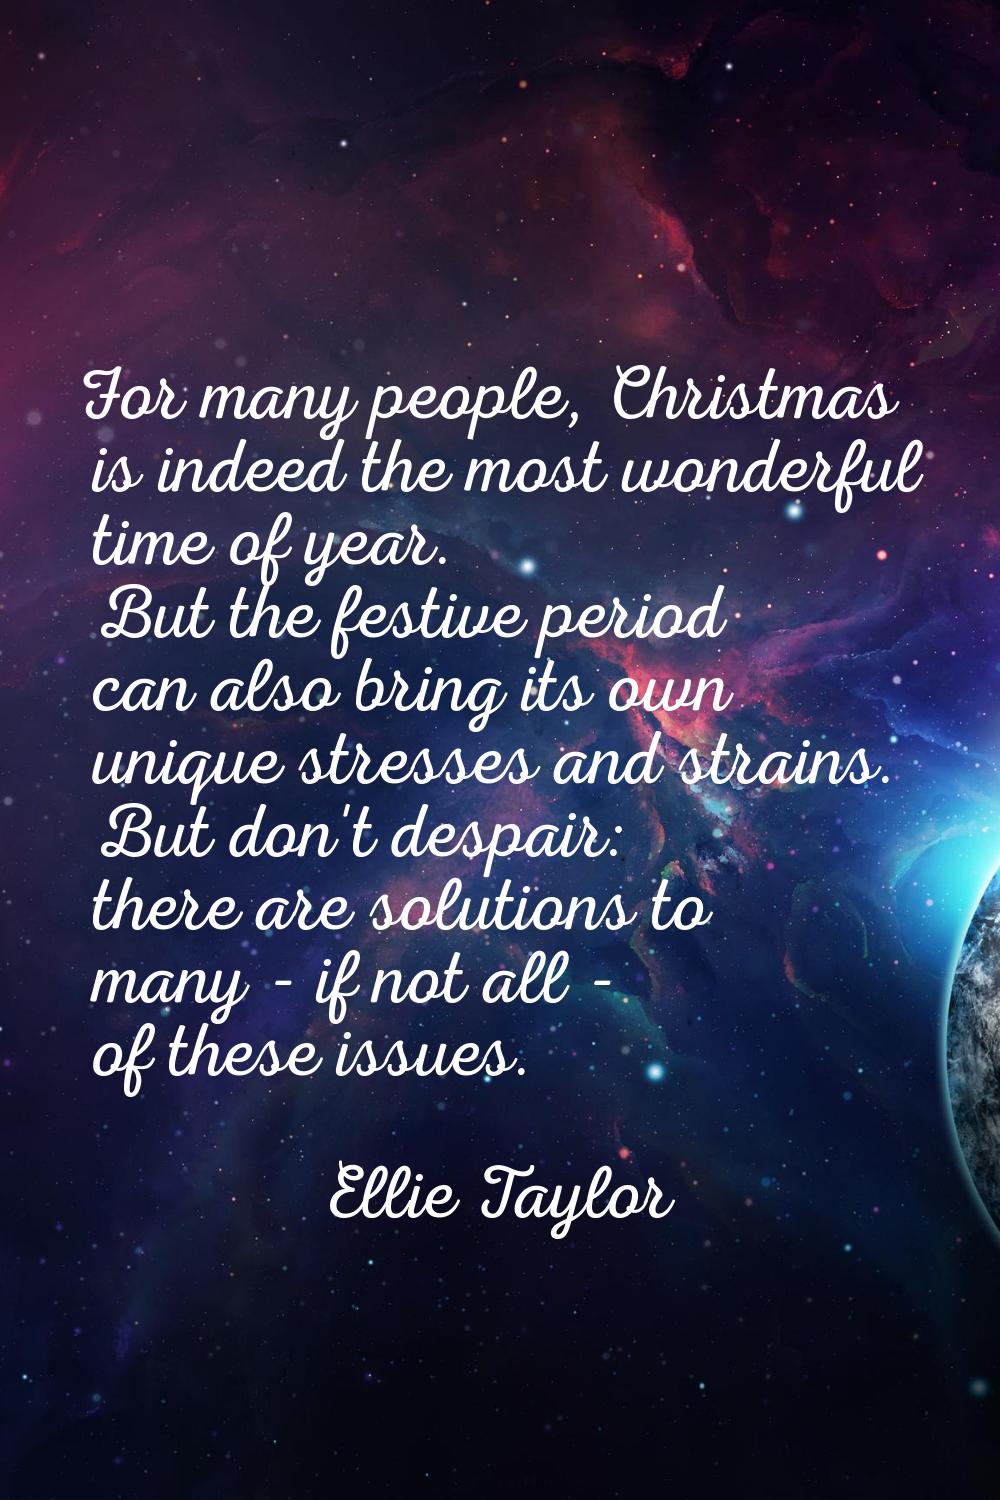 For many people, Christmas is indeed the most wonderful time of year. But the festive period can al